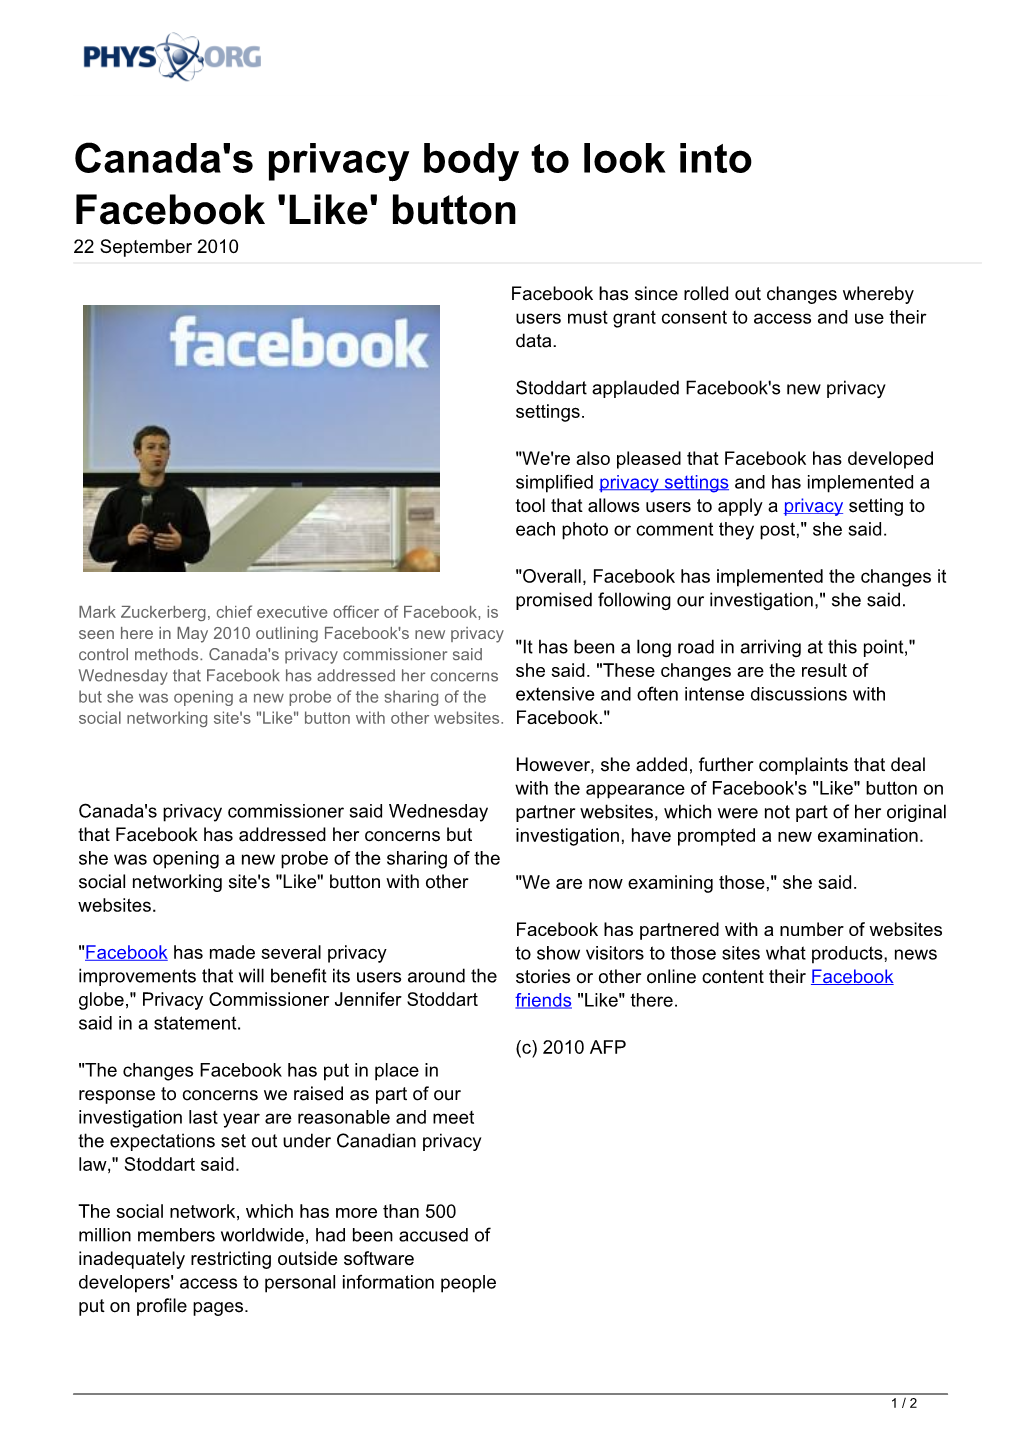 Canada's Privacy Body to Look Into Facebook 'Like' Button 22 September 2010